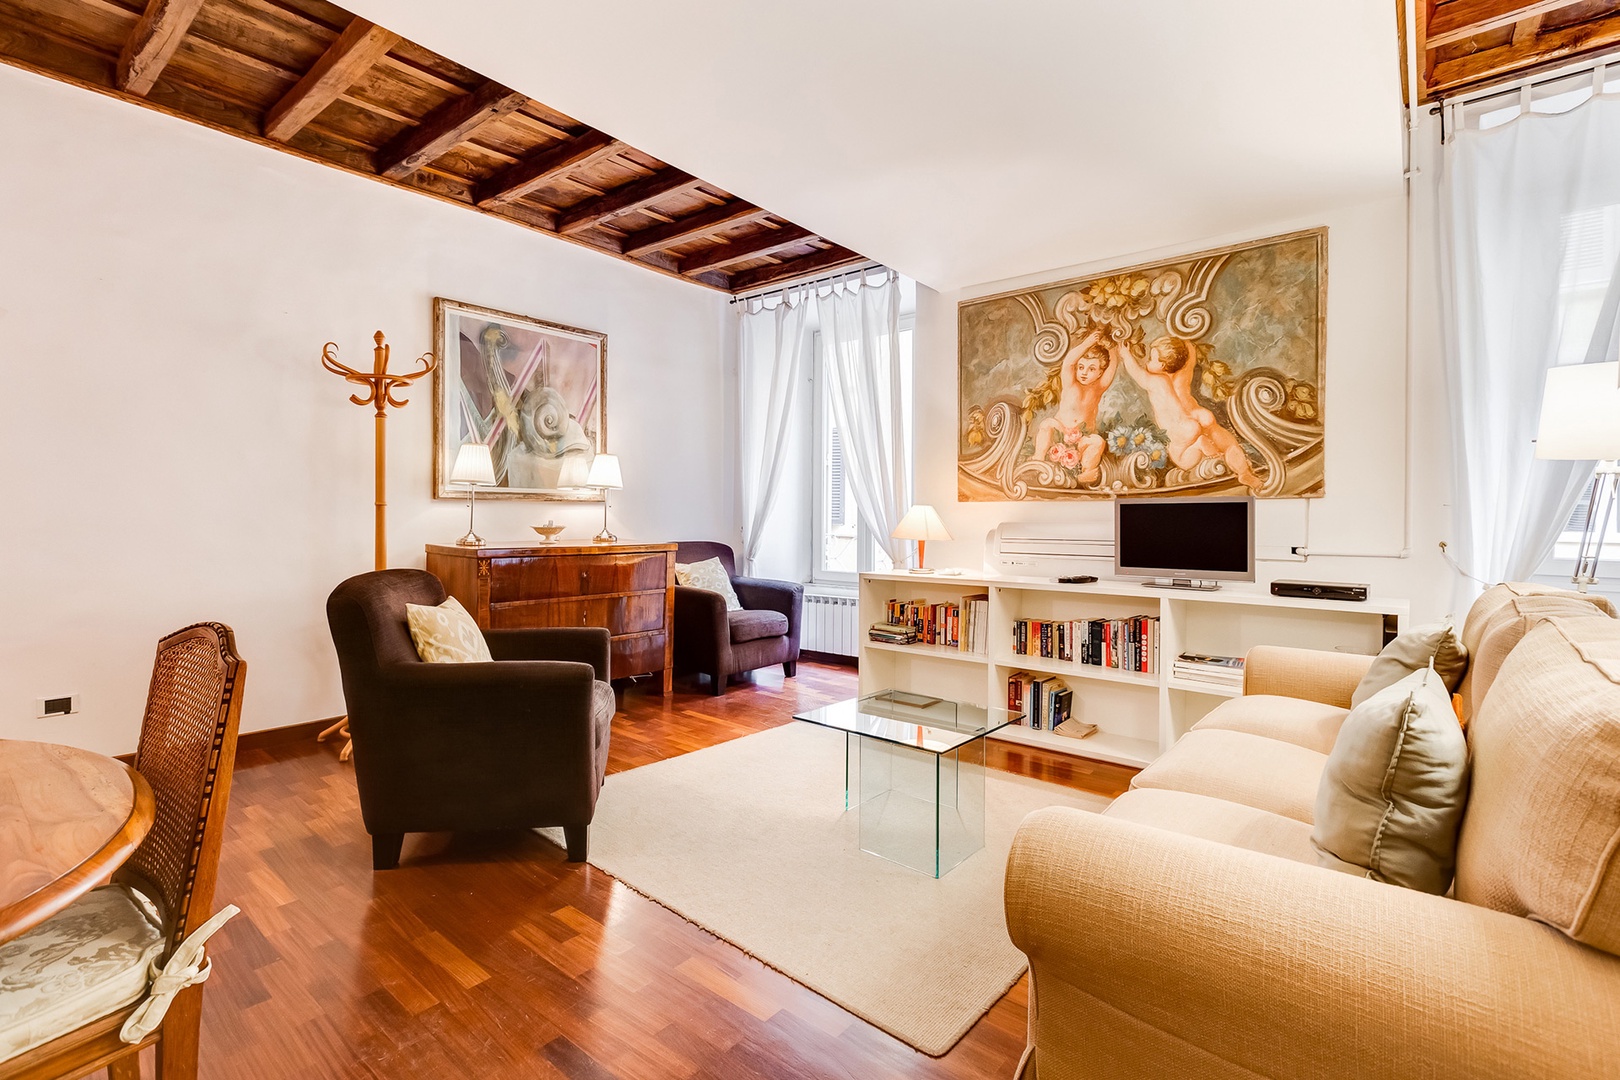 Welcoming Bellina apartment is tastefully appointed with sofa bed and two comfortable armchairs.